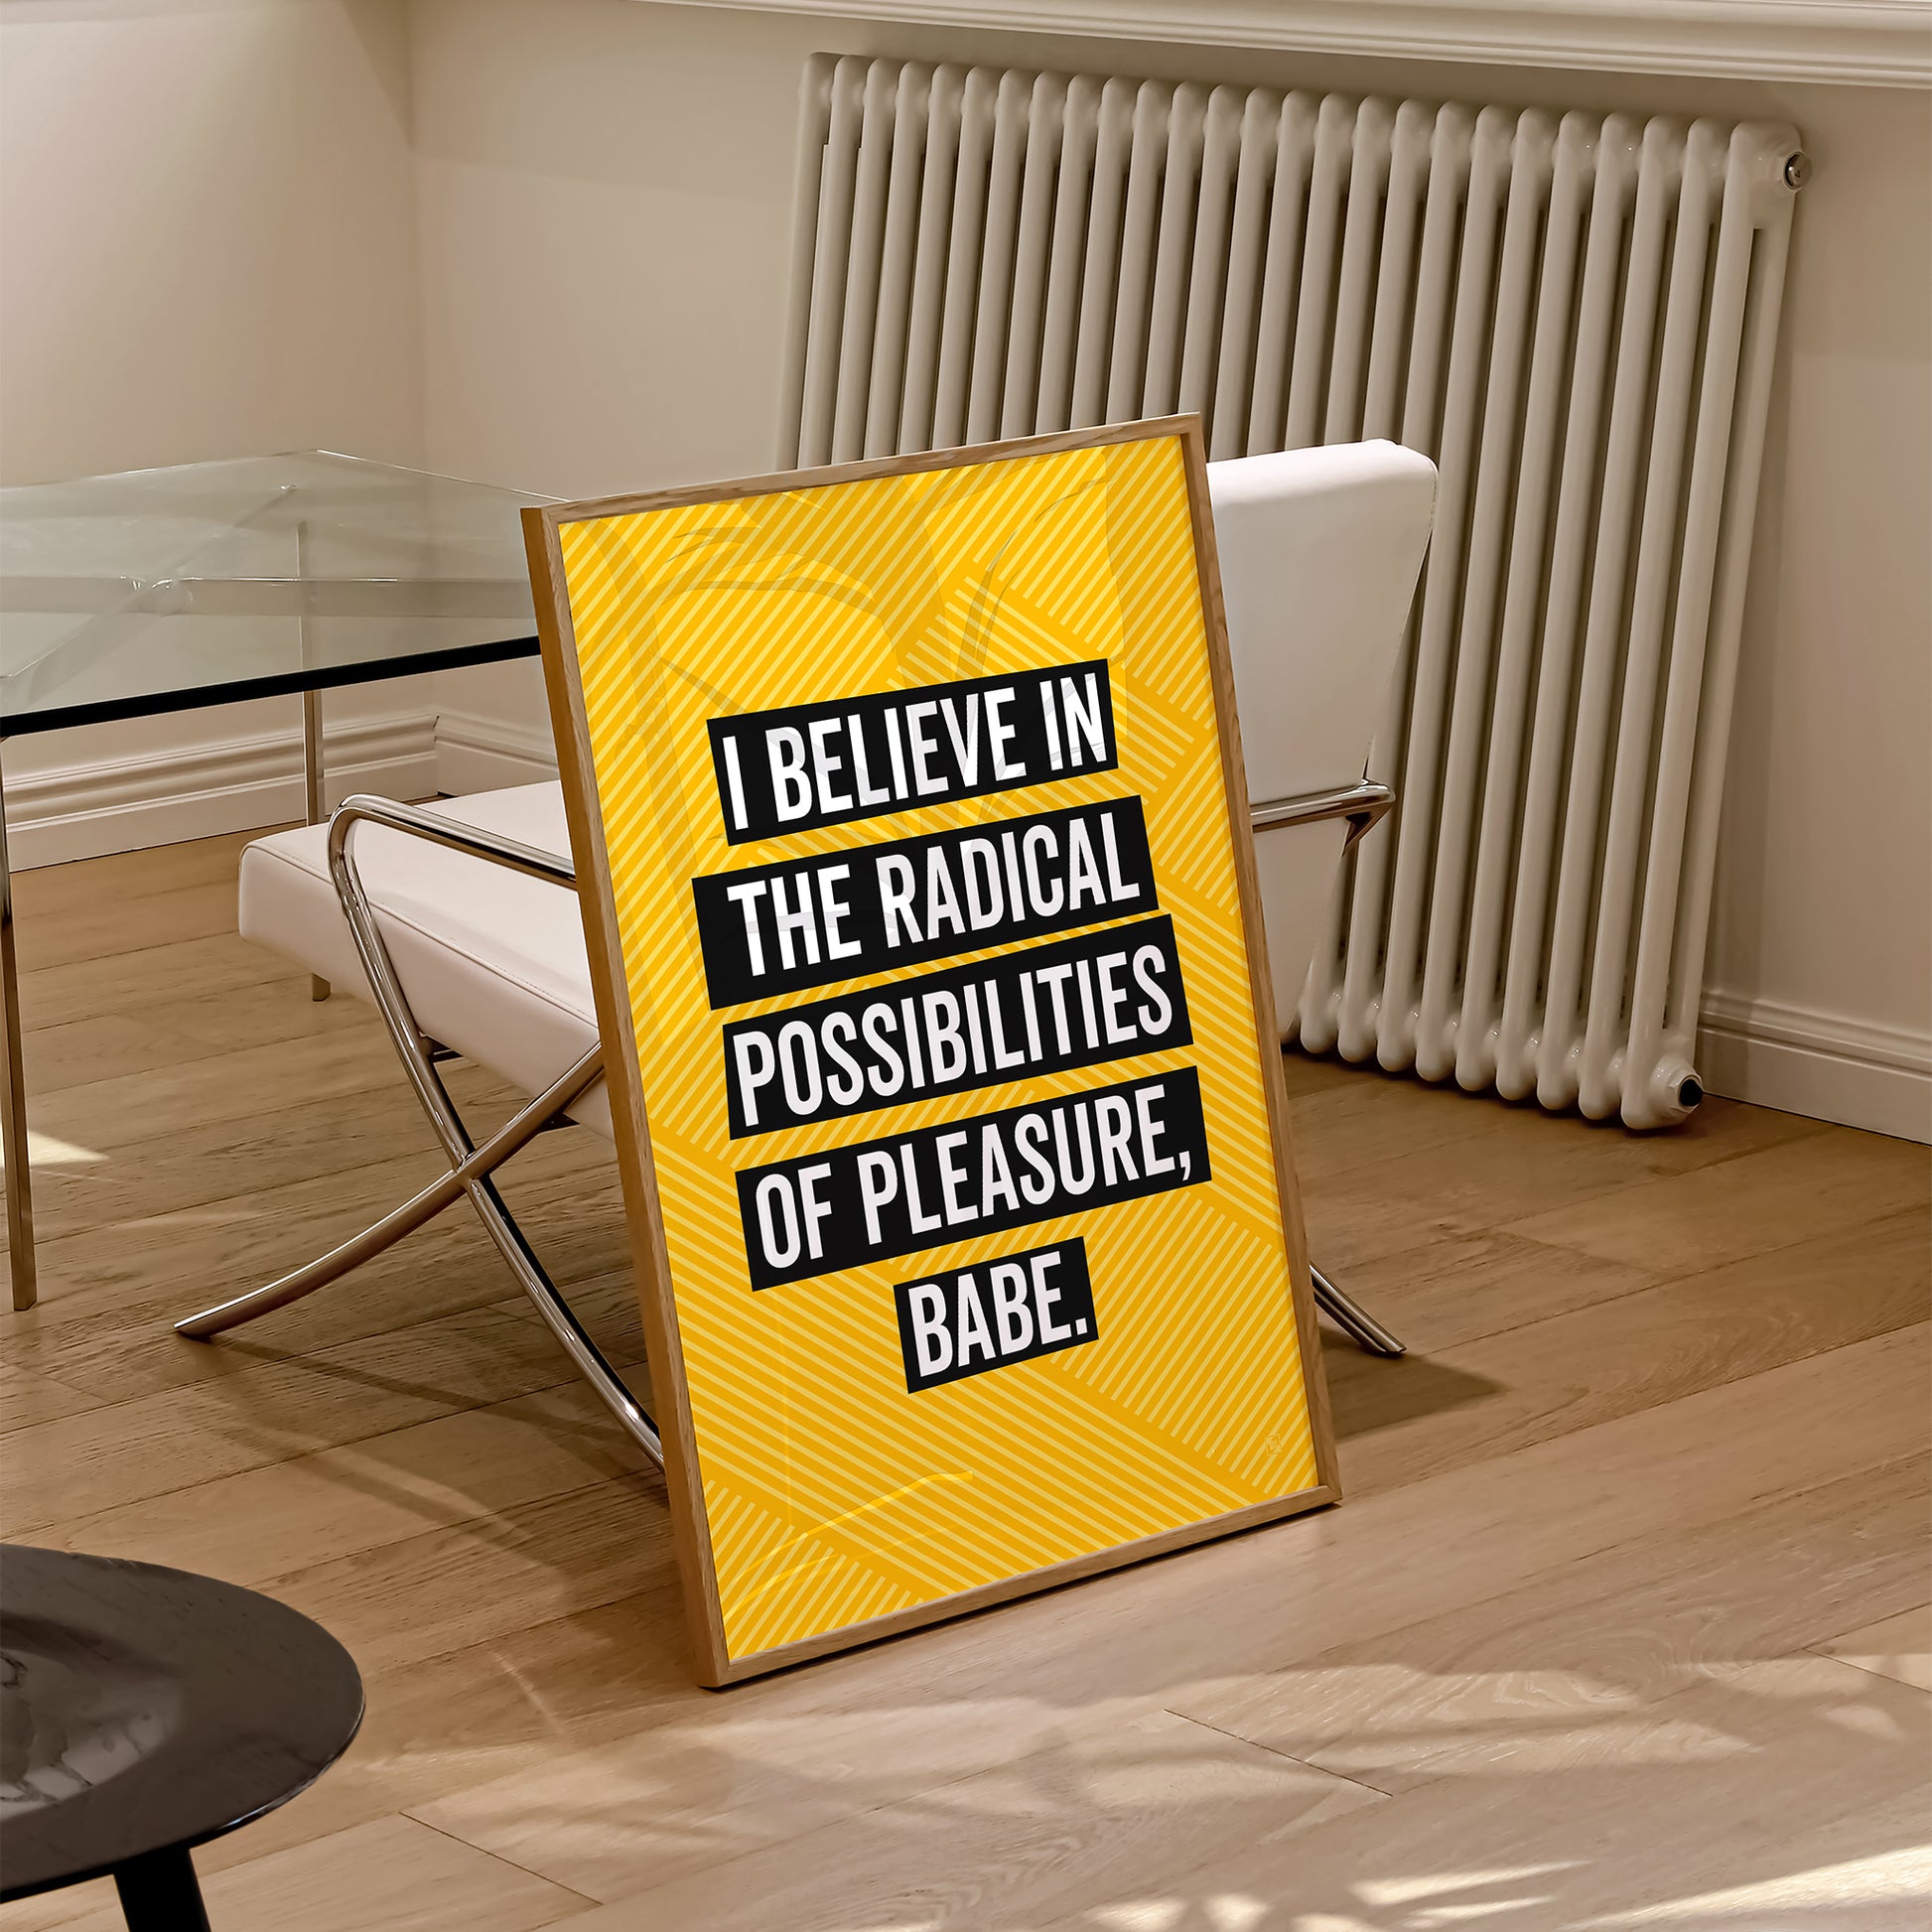 Be inspired by our golden yellow Bikini Kill "I Believe in the Radical Possibilities of Pleasure Babe" lyrics art print! This artwork was printed using the giclée process on archival acid-free paper and is elegantly showcased in a natural oak frame, highlighting its timeless beauty in every detail.